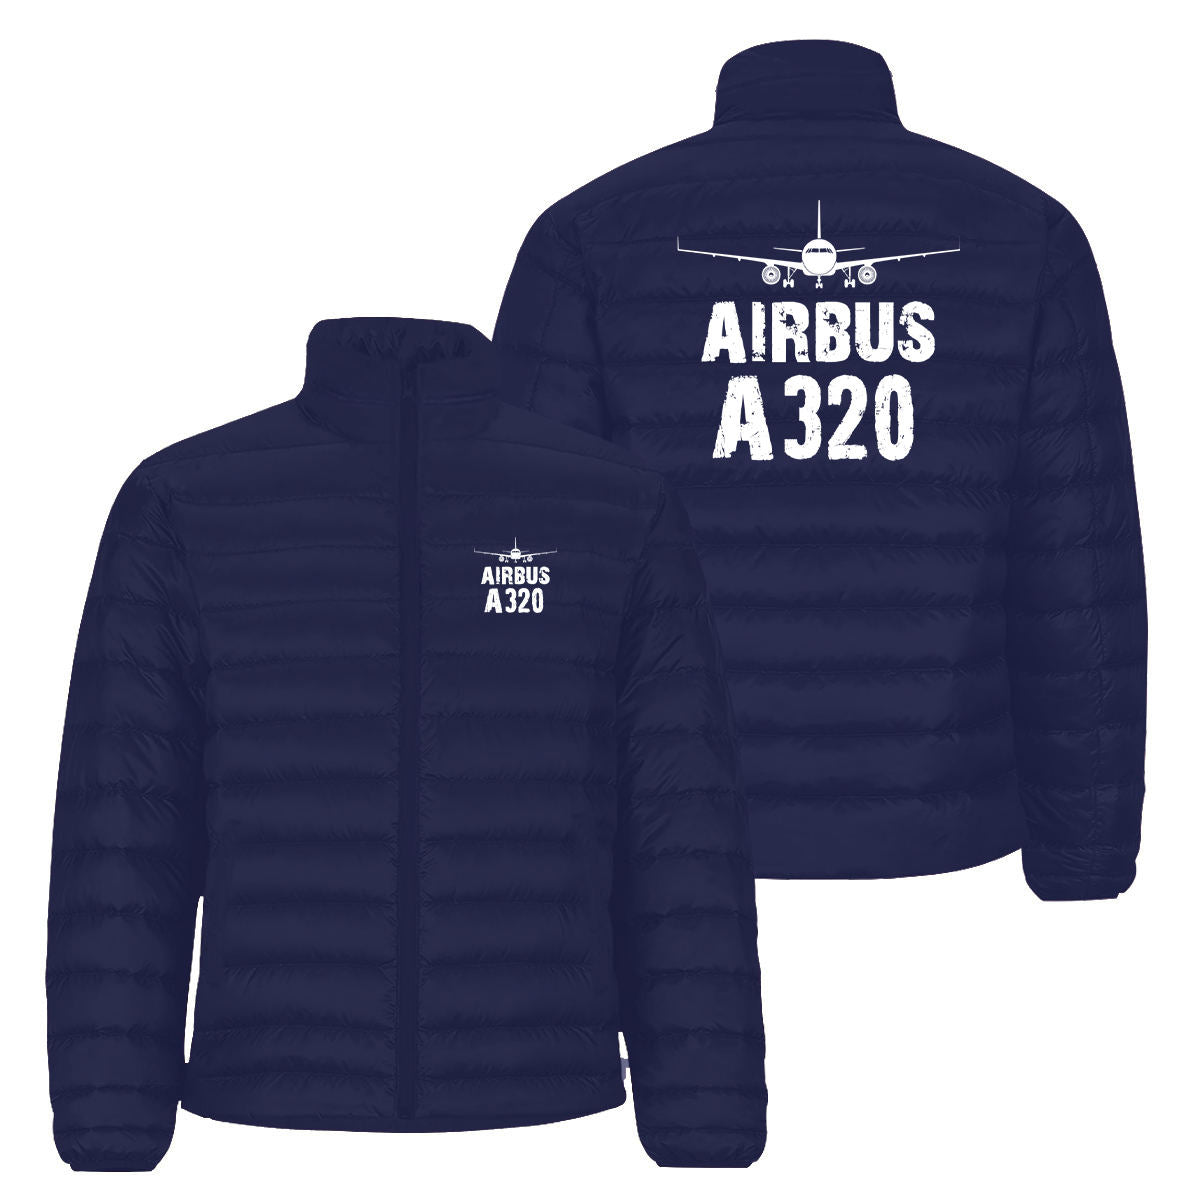 Airbus A320 & Plane Designed Padded Jackets